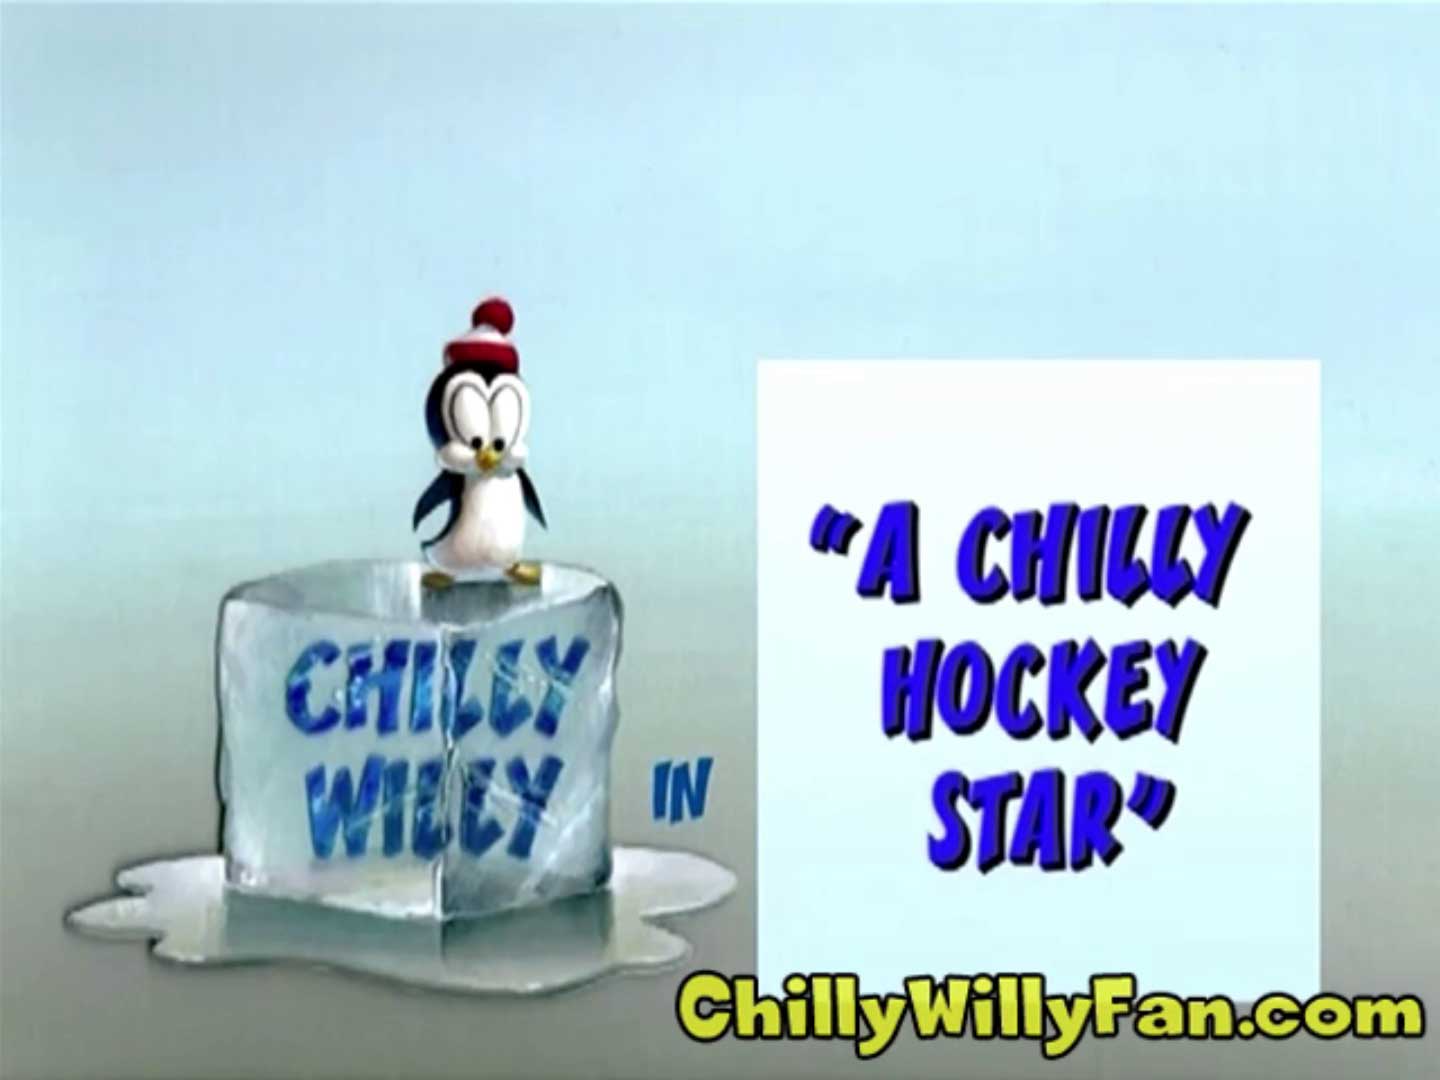 Chilly Willy - A Chilly Hockey Star